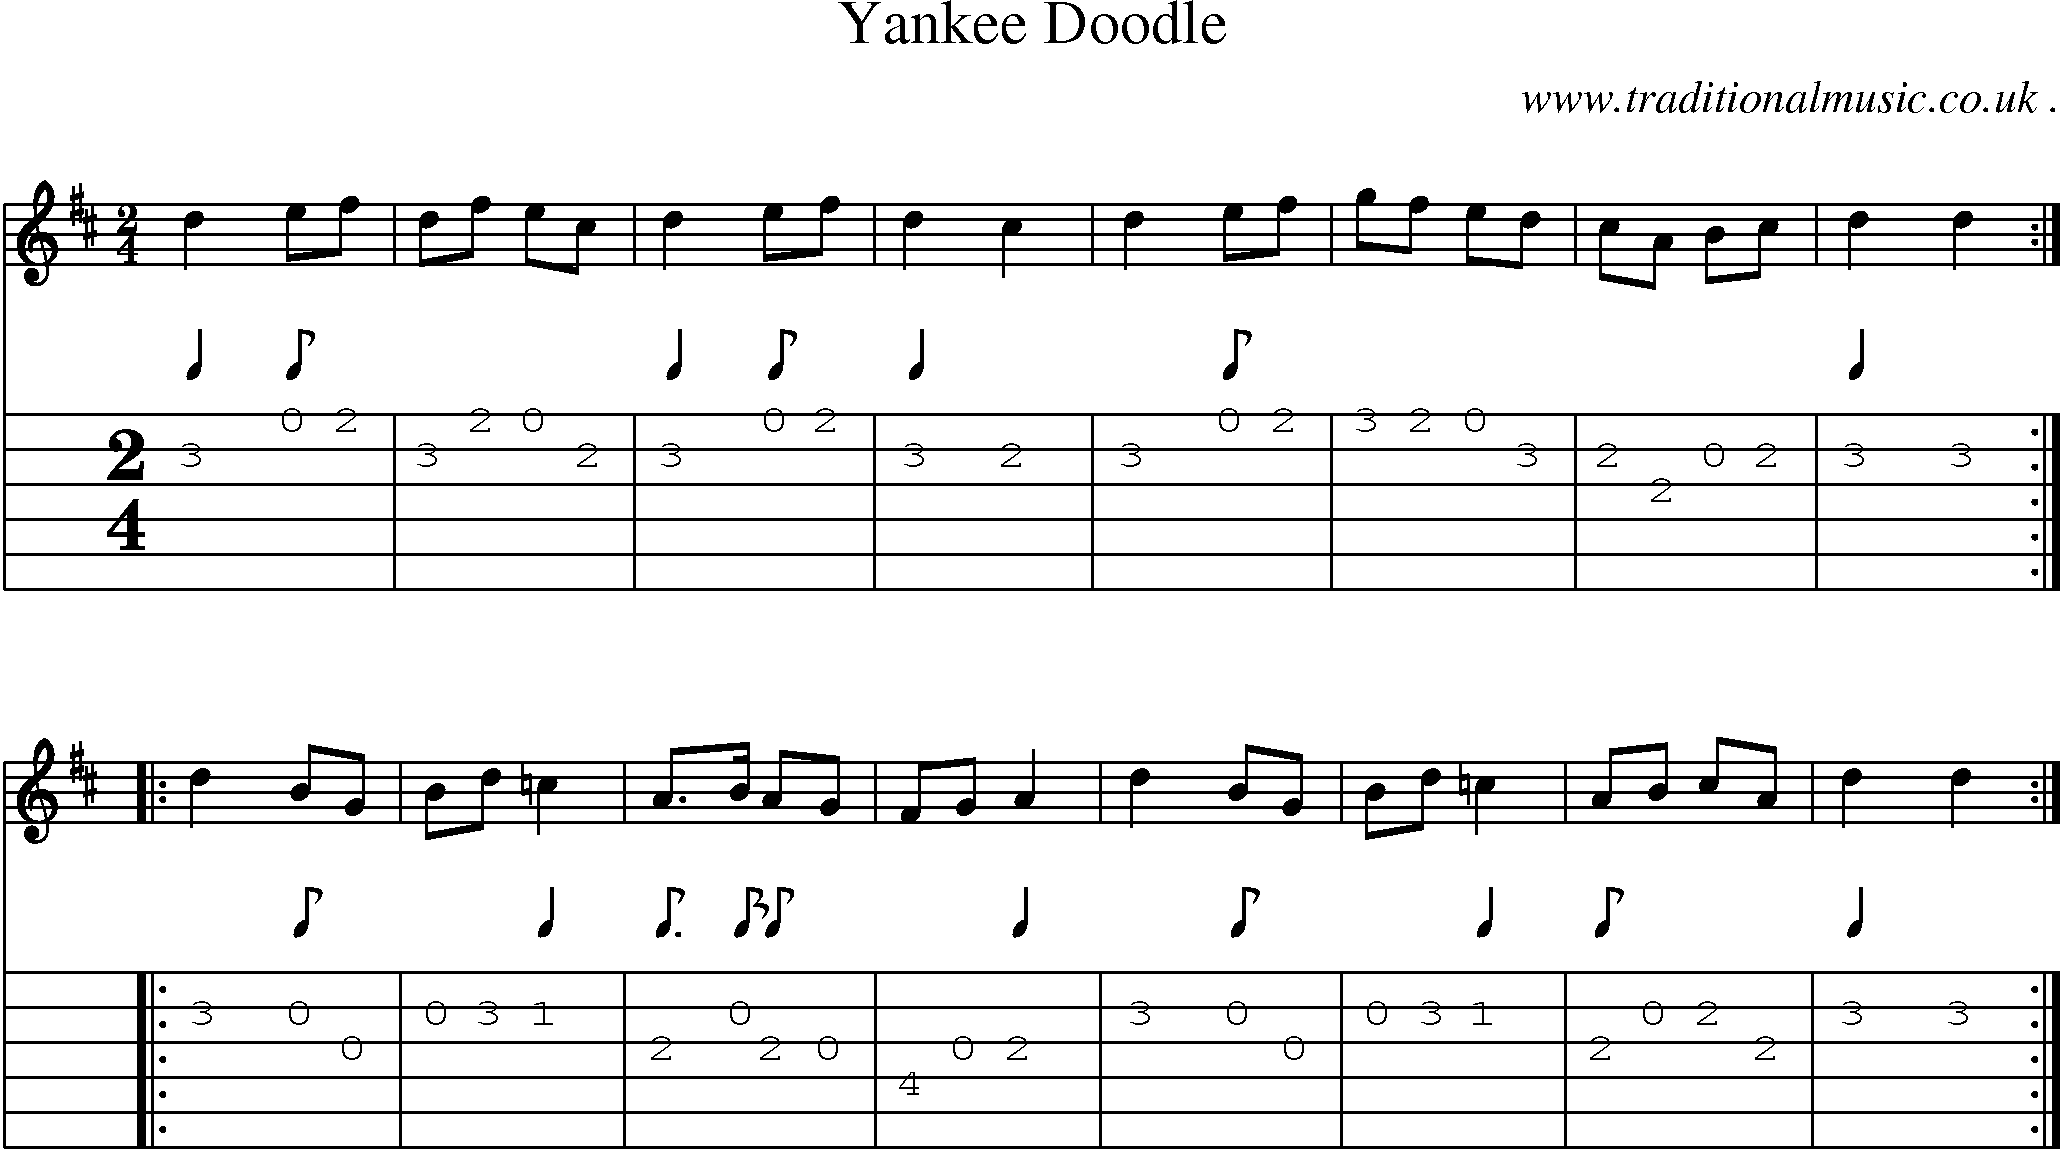 Music Score and Guitar Tabs for Yankee Doodle